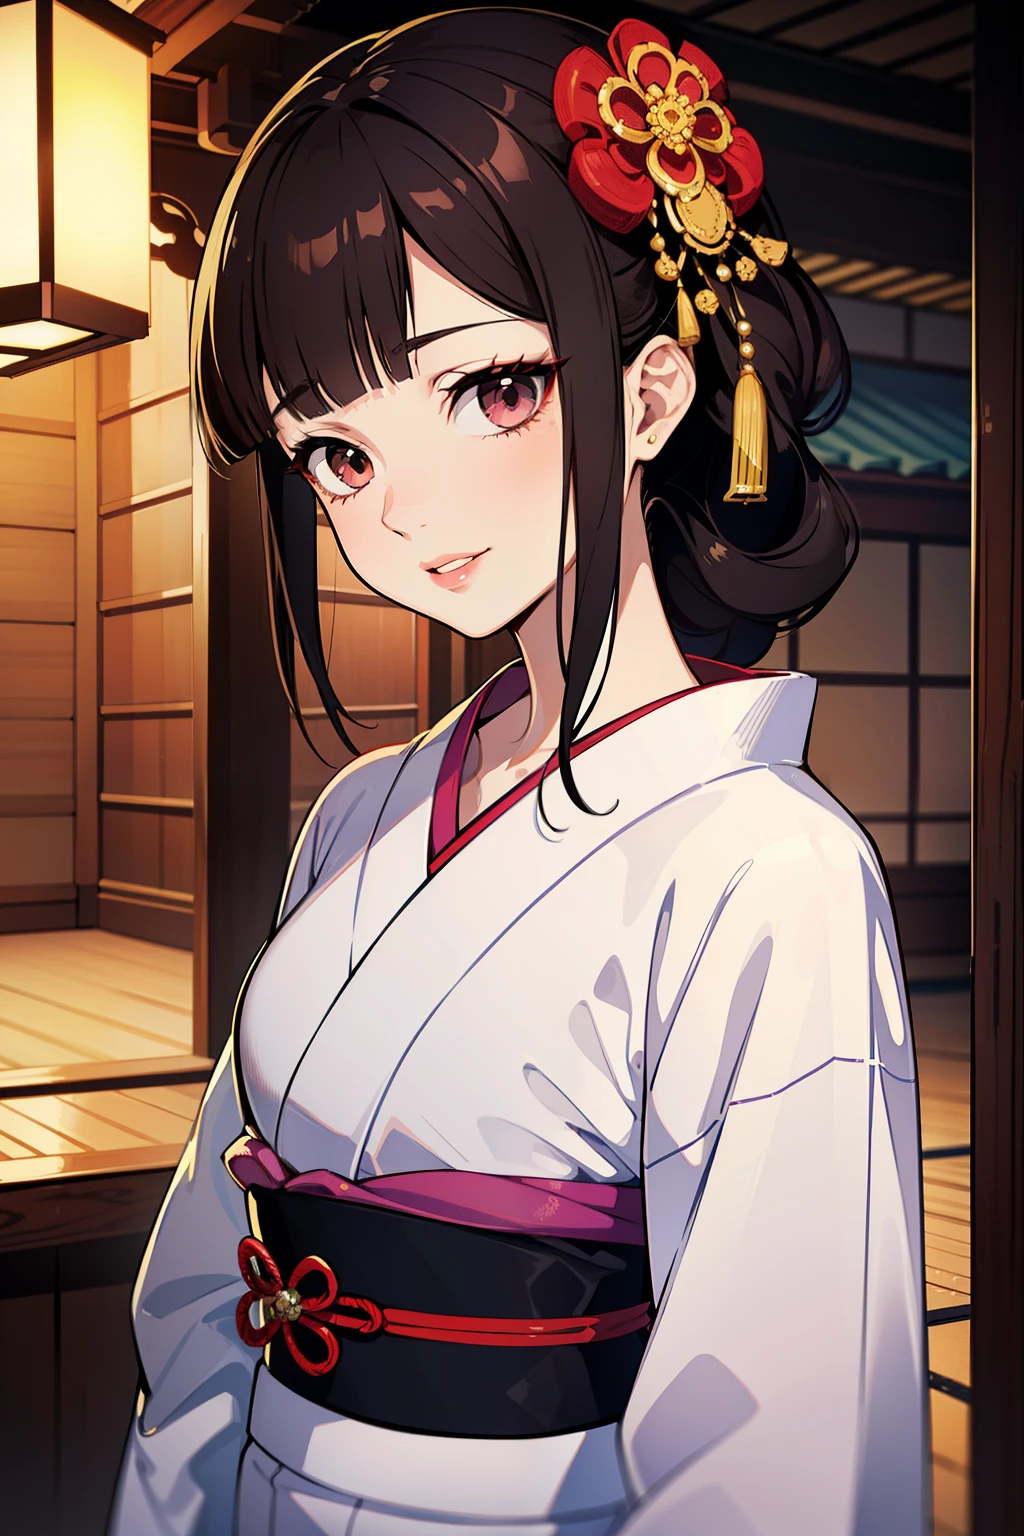 (high-quality, breathtaking),(expressive eyes, perfect face) (((yukata, sexy lips)), 1girl, female, solo, young adult, brown hair, black coloured eyes, stylised hair, gentle smile, medium length hair, loose hair, side bangs, tied up, japanese clothing, elegant, soft make up, hair pin accessory in hair, oiran, demon slayer art style